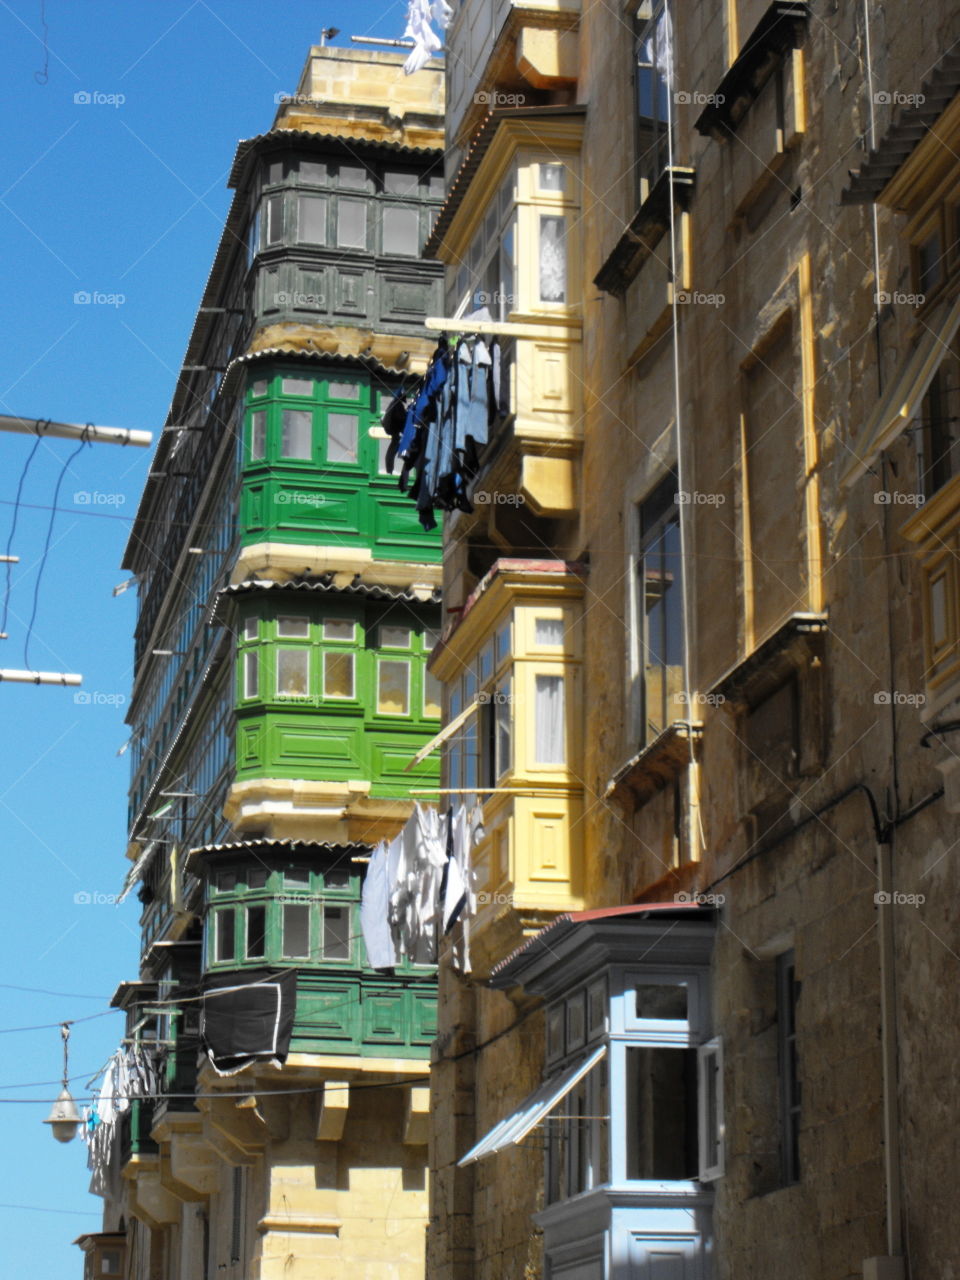 Drying laundry on the streets of Valletta, Malta